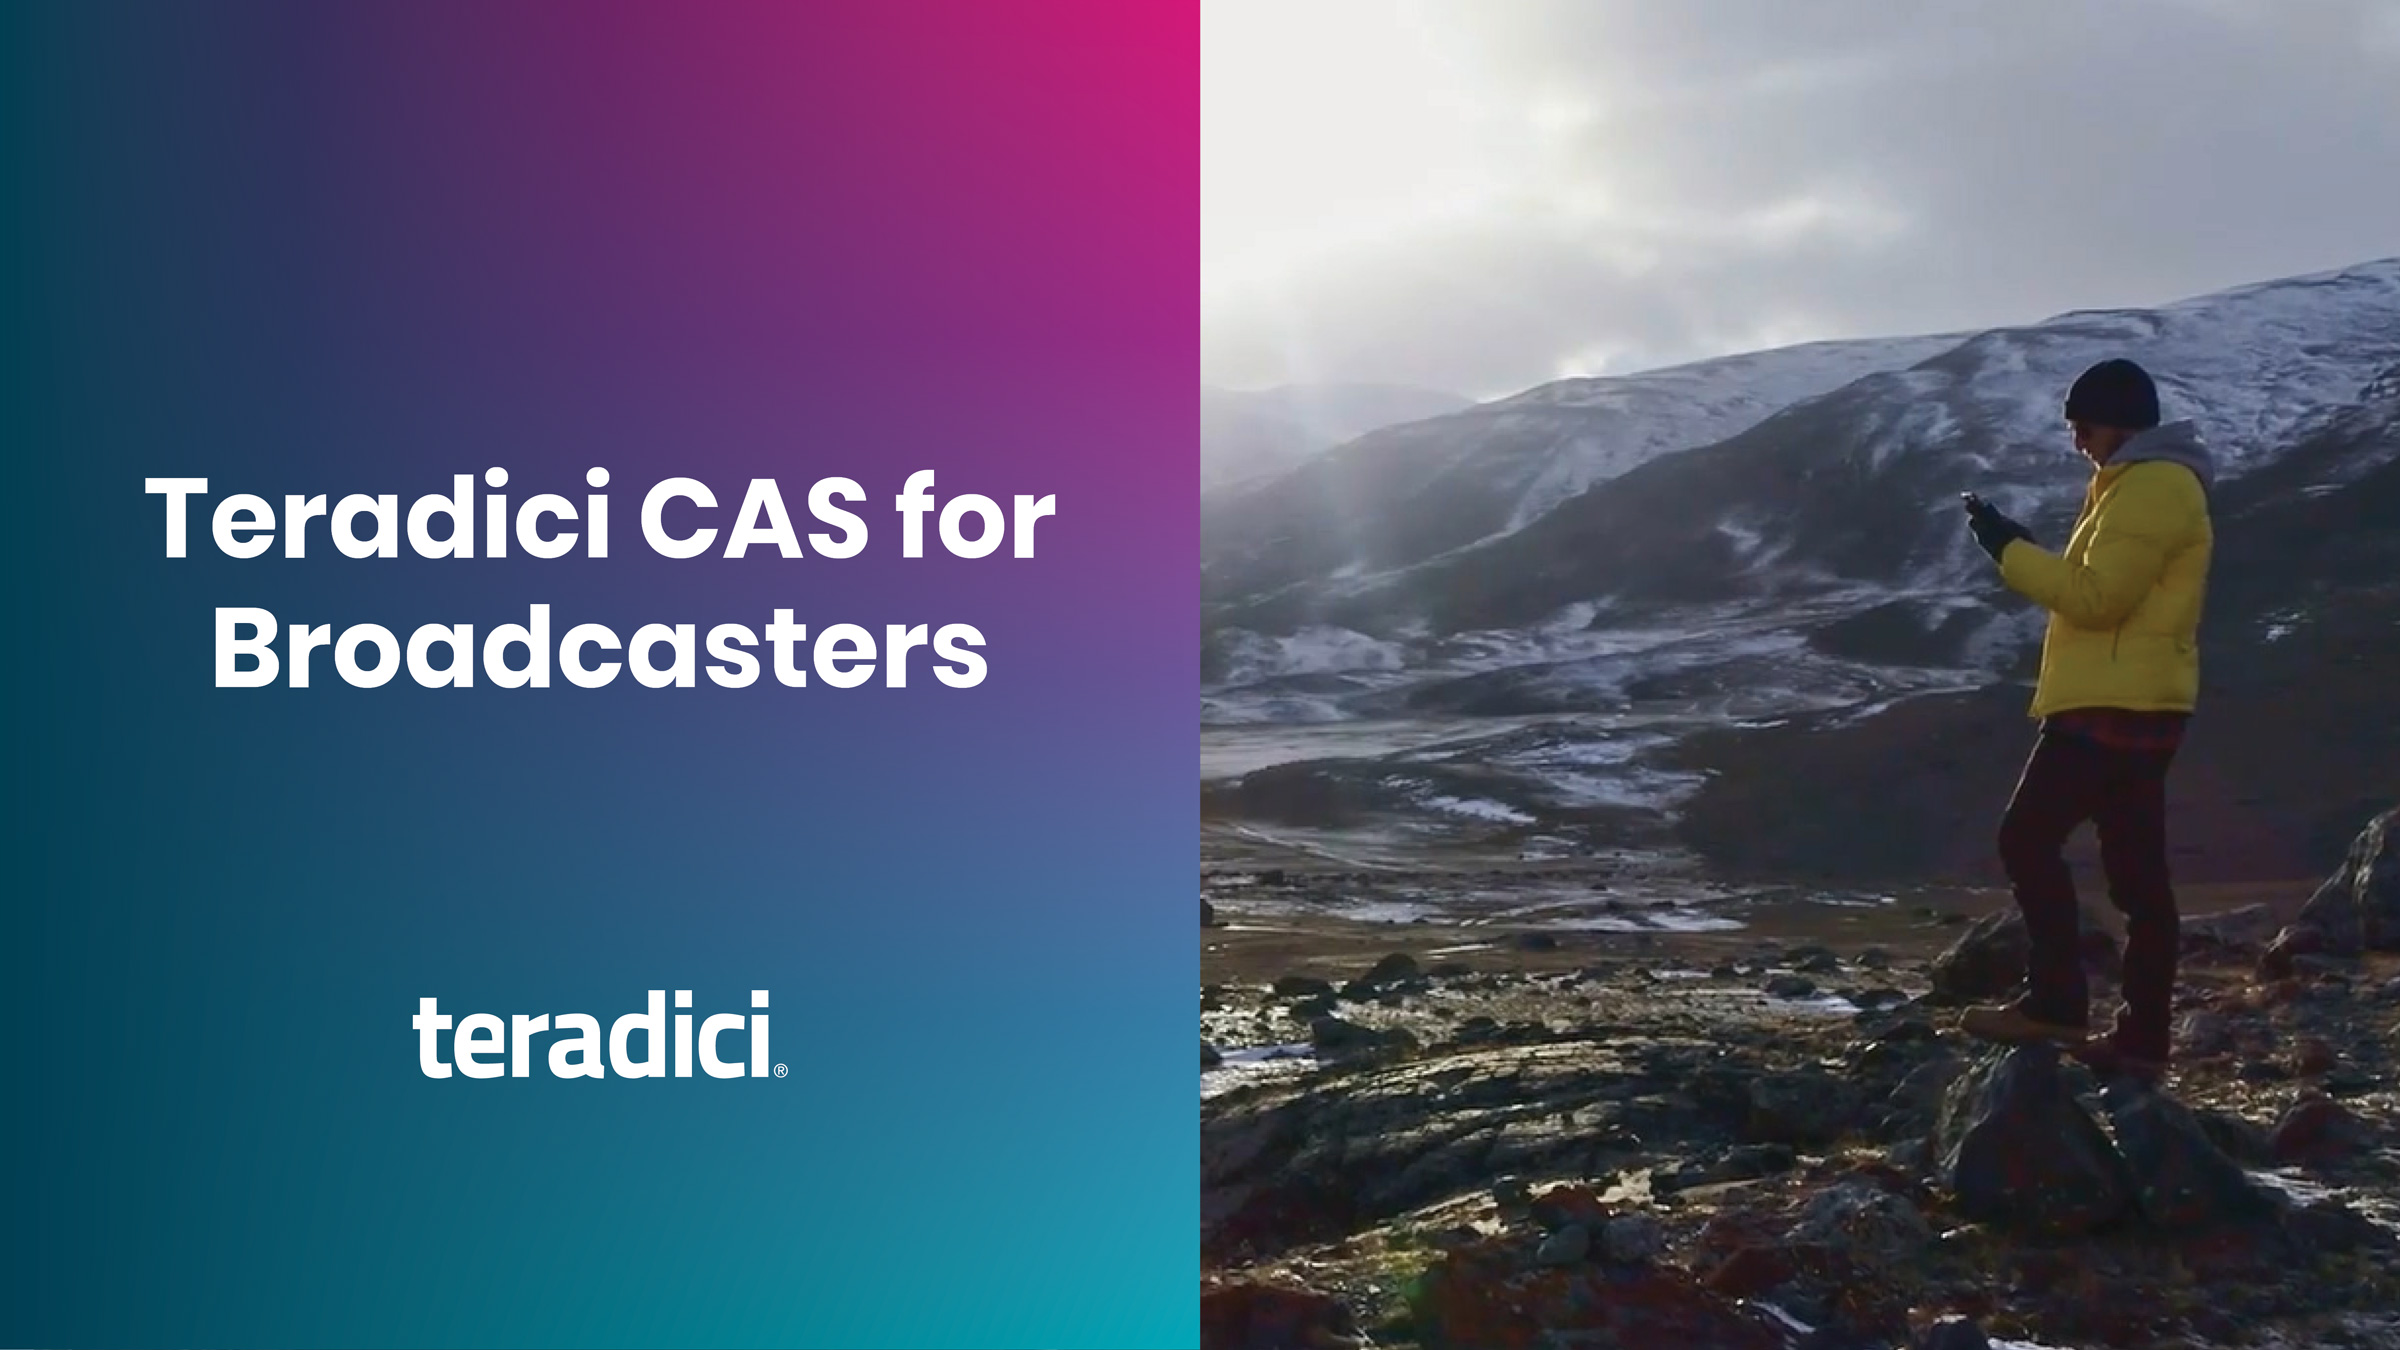 Teradici CAS for Broadcasters